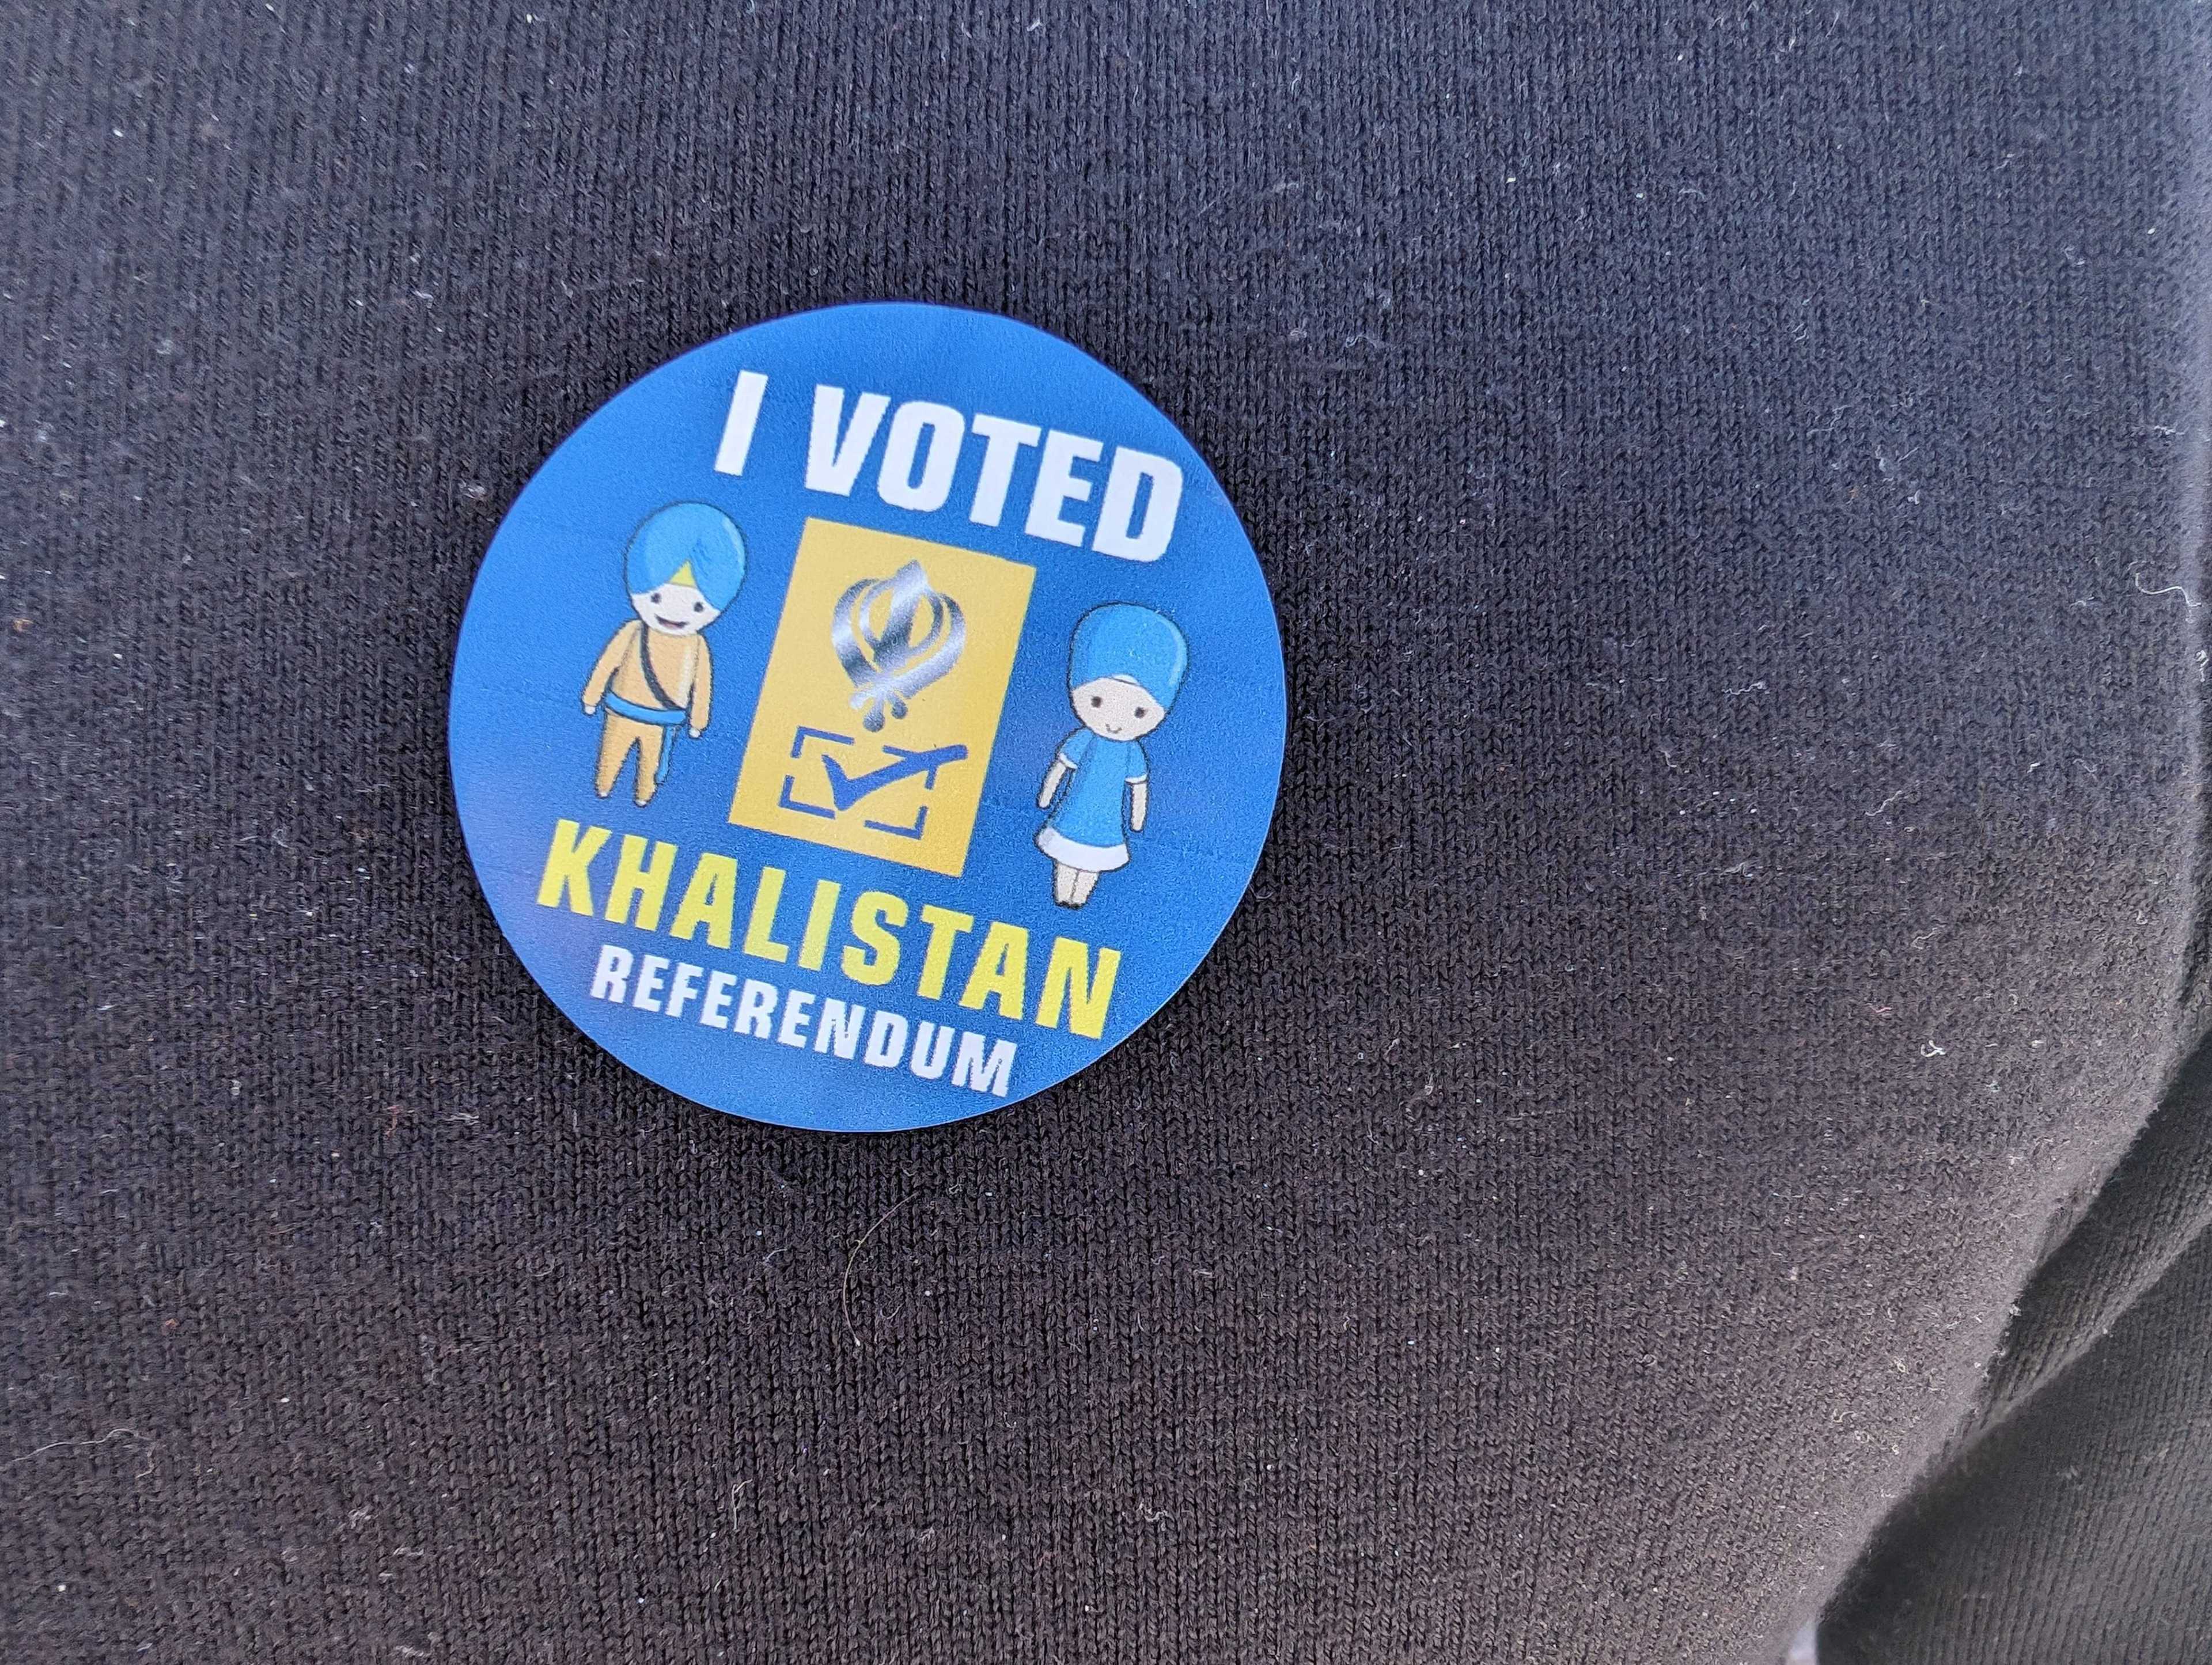 A blue sticker with images of two people on it, with white and yellow lettering reading I VOTED and KHALISTAN REFERENDUM